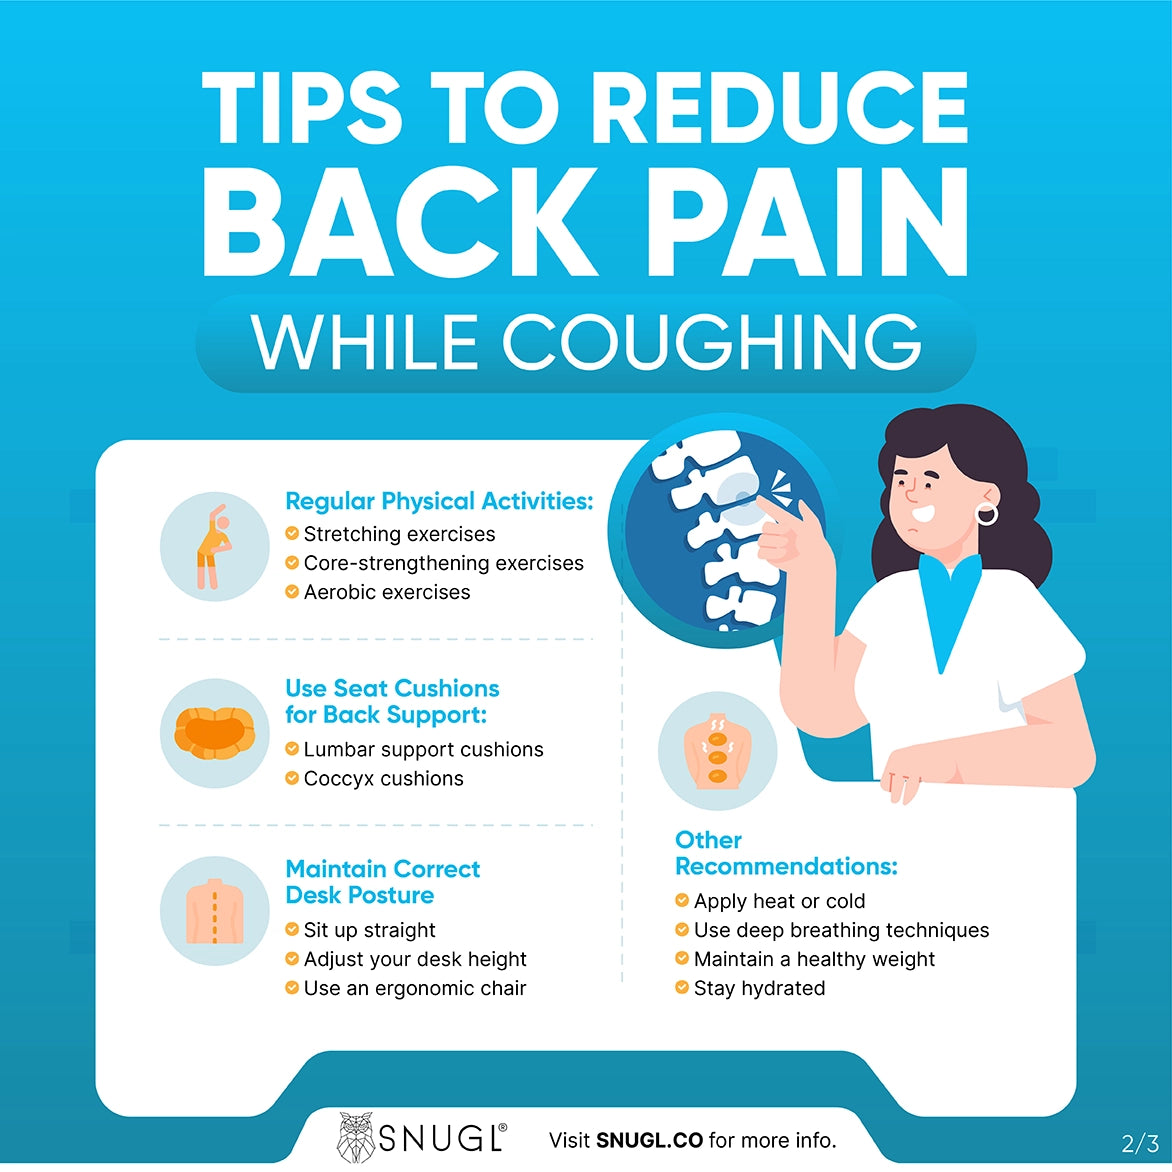 An infographic covering the tips to reduce back pain while coughing